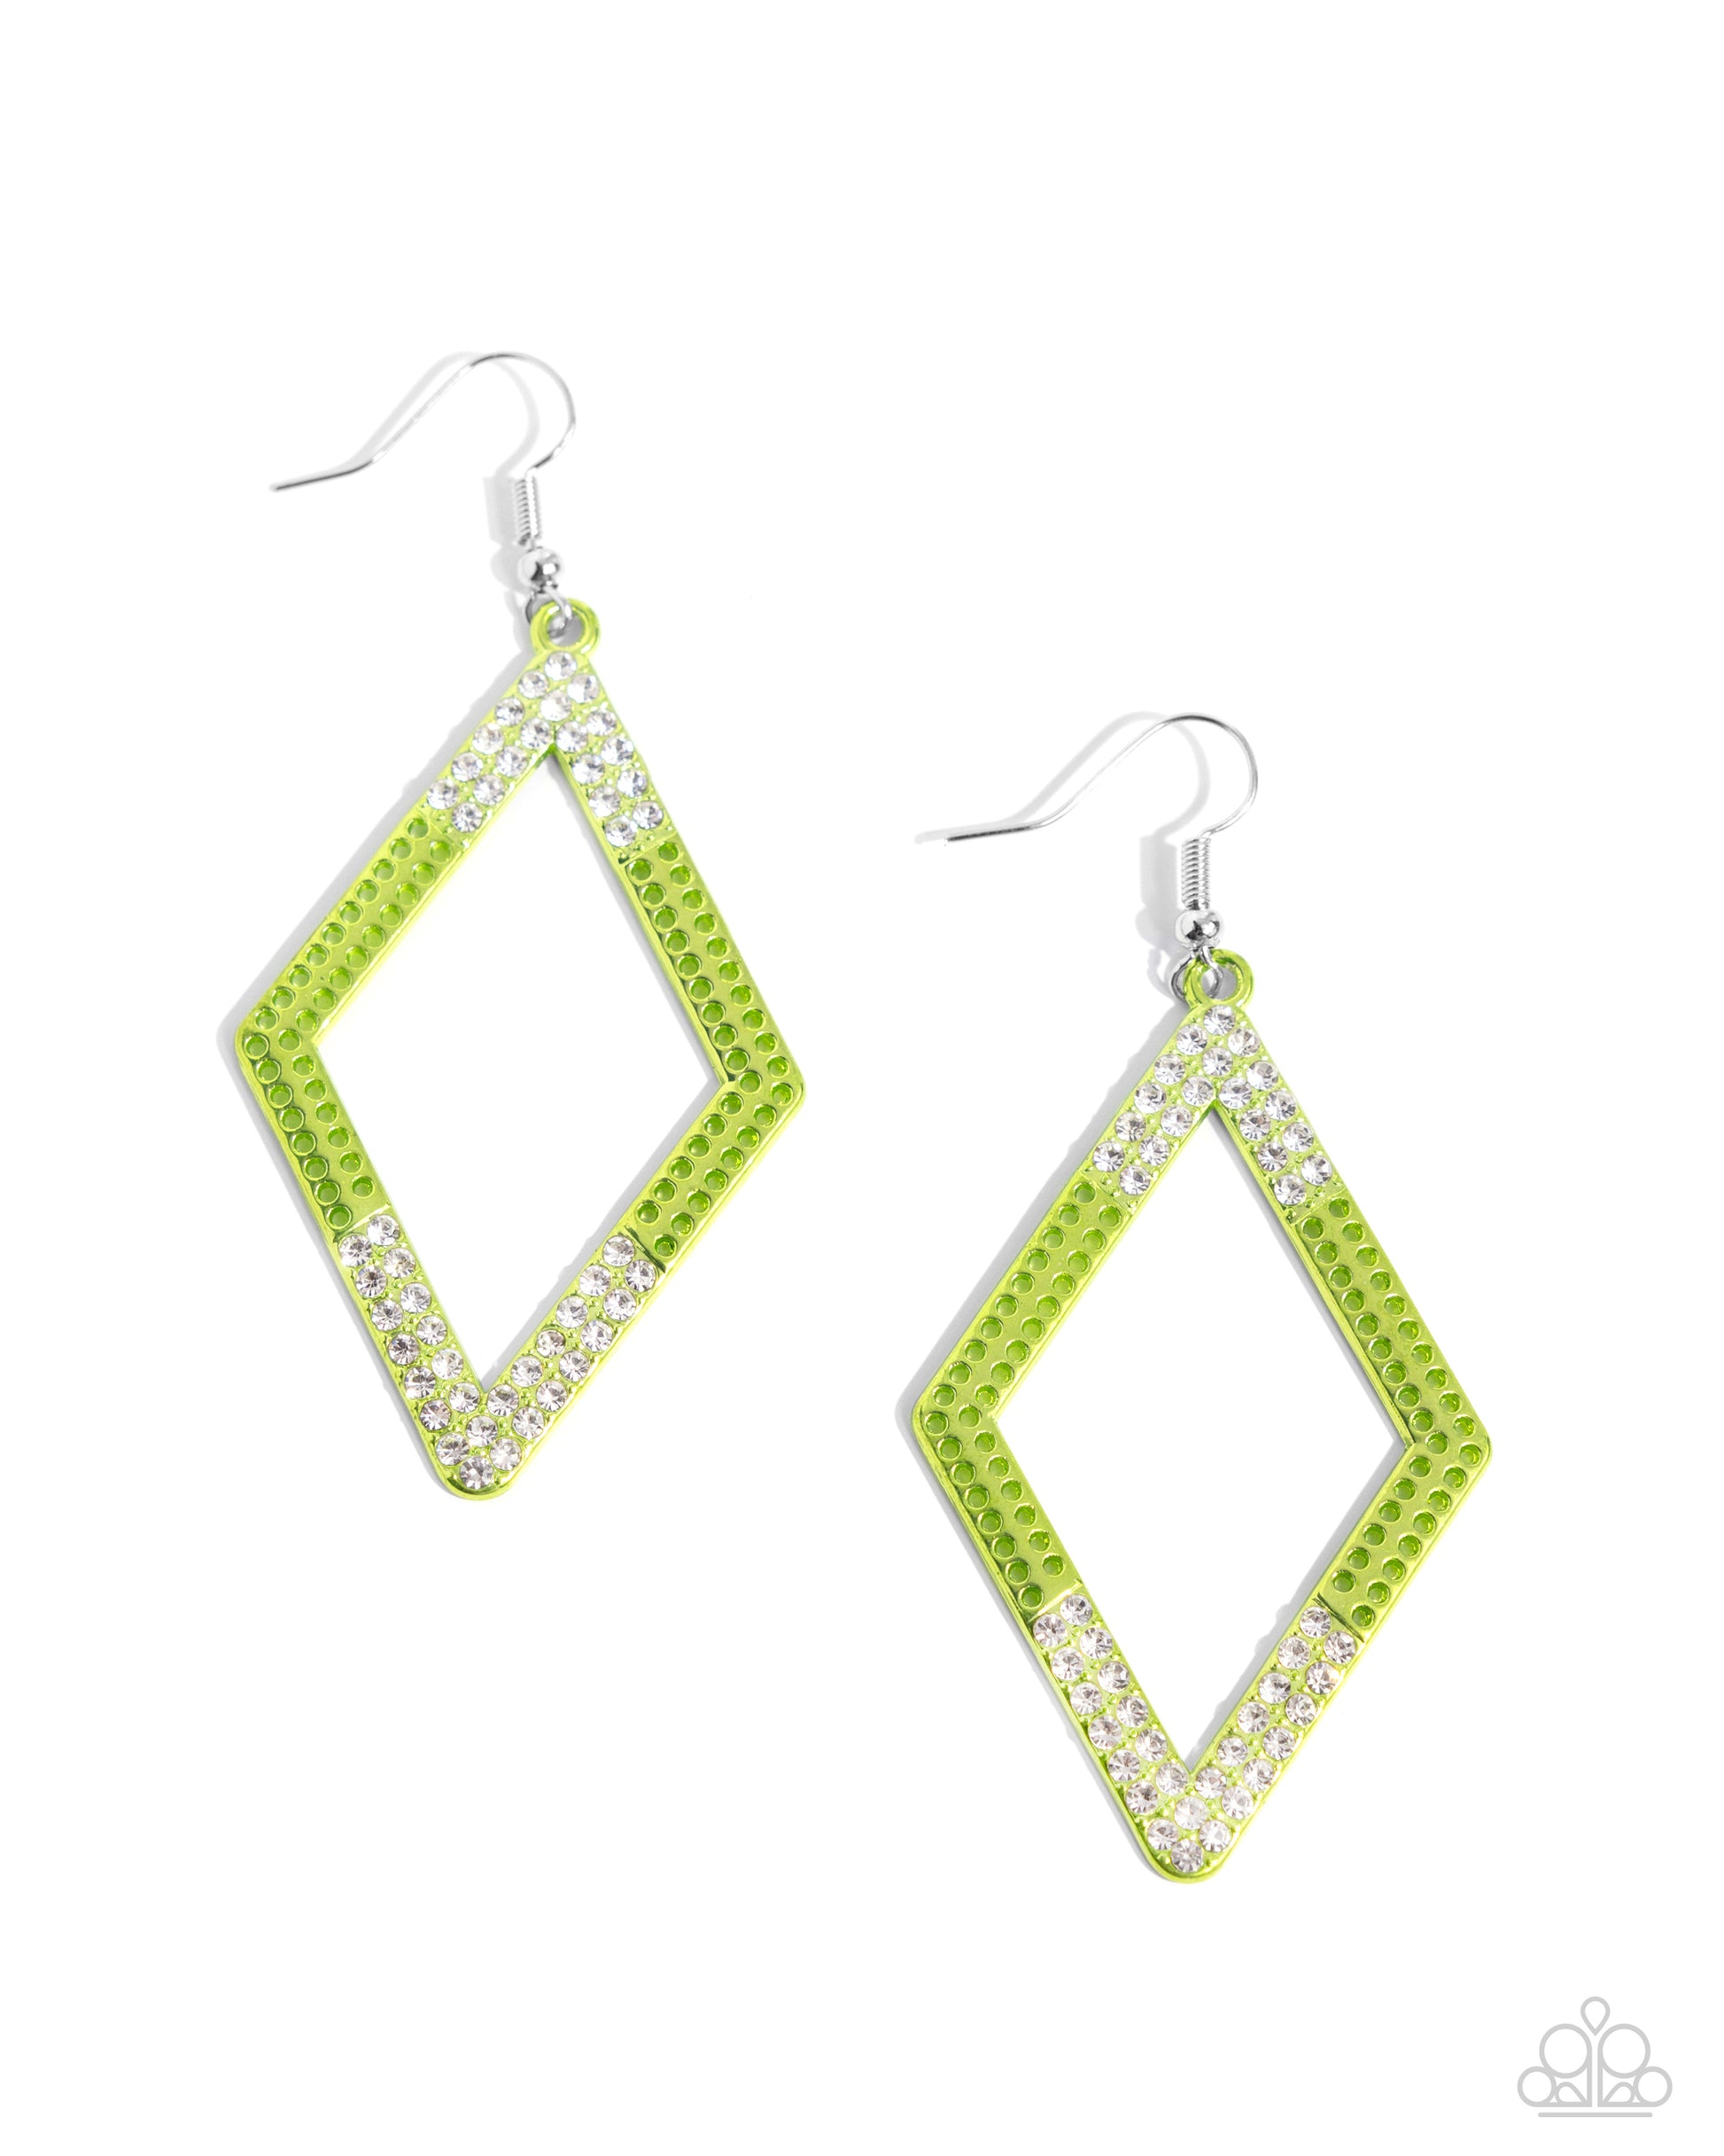 Eloquently Edgy Green Earring - Paparazzi Accessories Dipped in an electric green hue, a dotted diamond frame is sprinkled with dainty white rhinestones on its ends for a dazzling, dynamic design. Earring attaches to a standard fishhook fitting. Sold as one pair of earrings. P5ED-GRXX-033XX